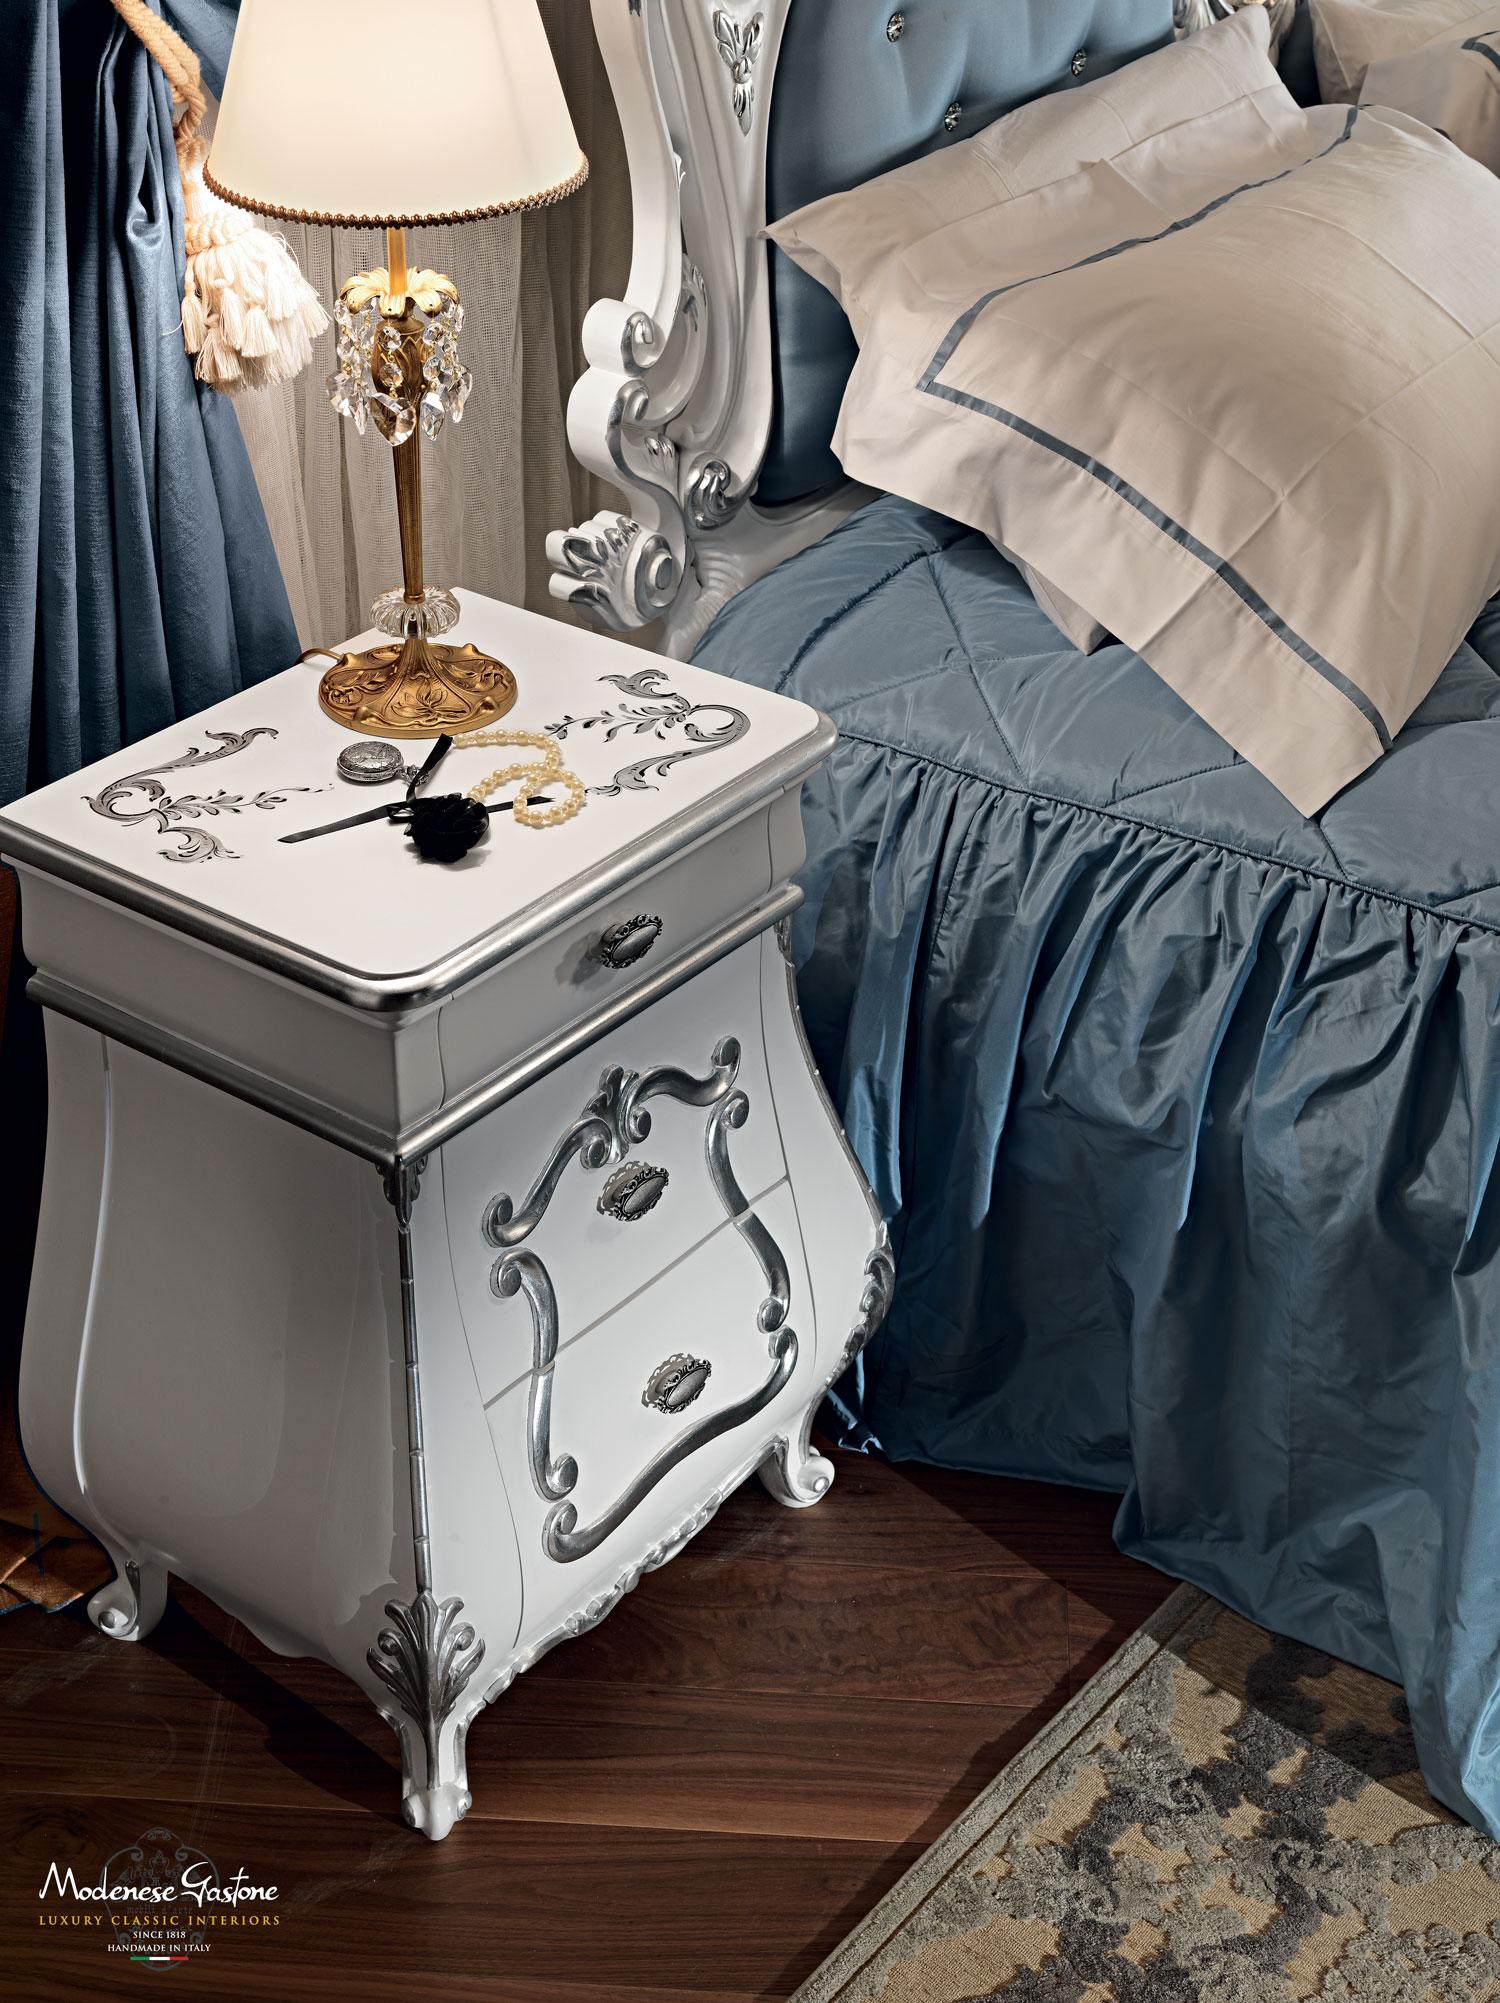 Elaborately carved baroque night stand by Modenese Luxury Interiors with white lacquered finish and silver leaf handmade decorations. This curved-shaped item, which is good in luxury bedrooms alongside beds, dressing tables and credenzas, features